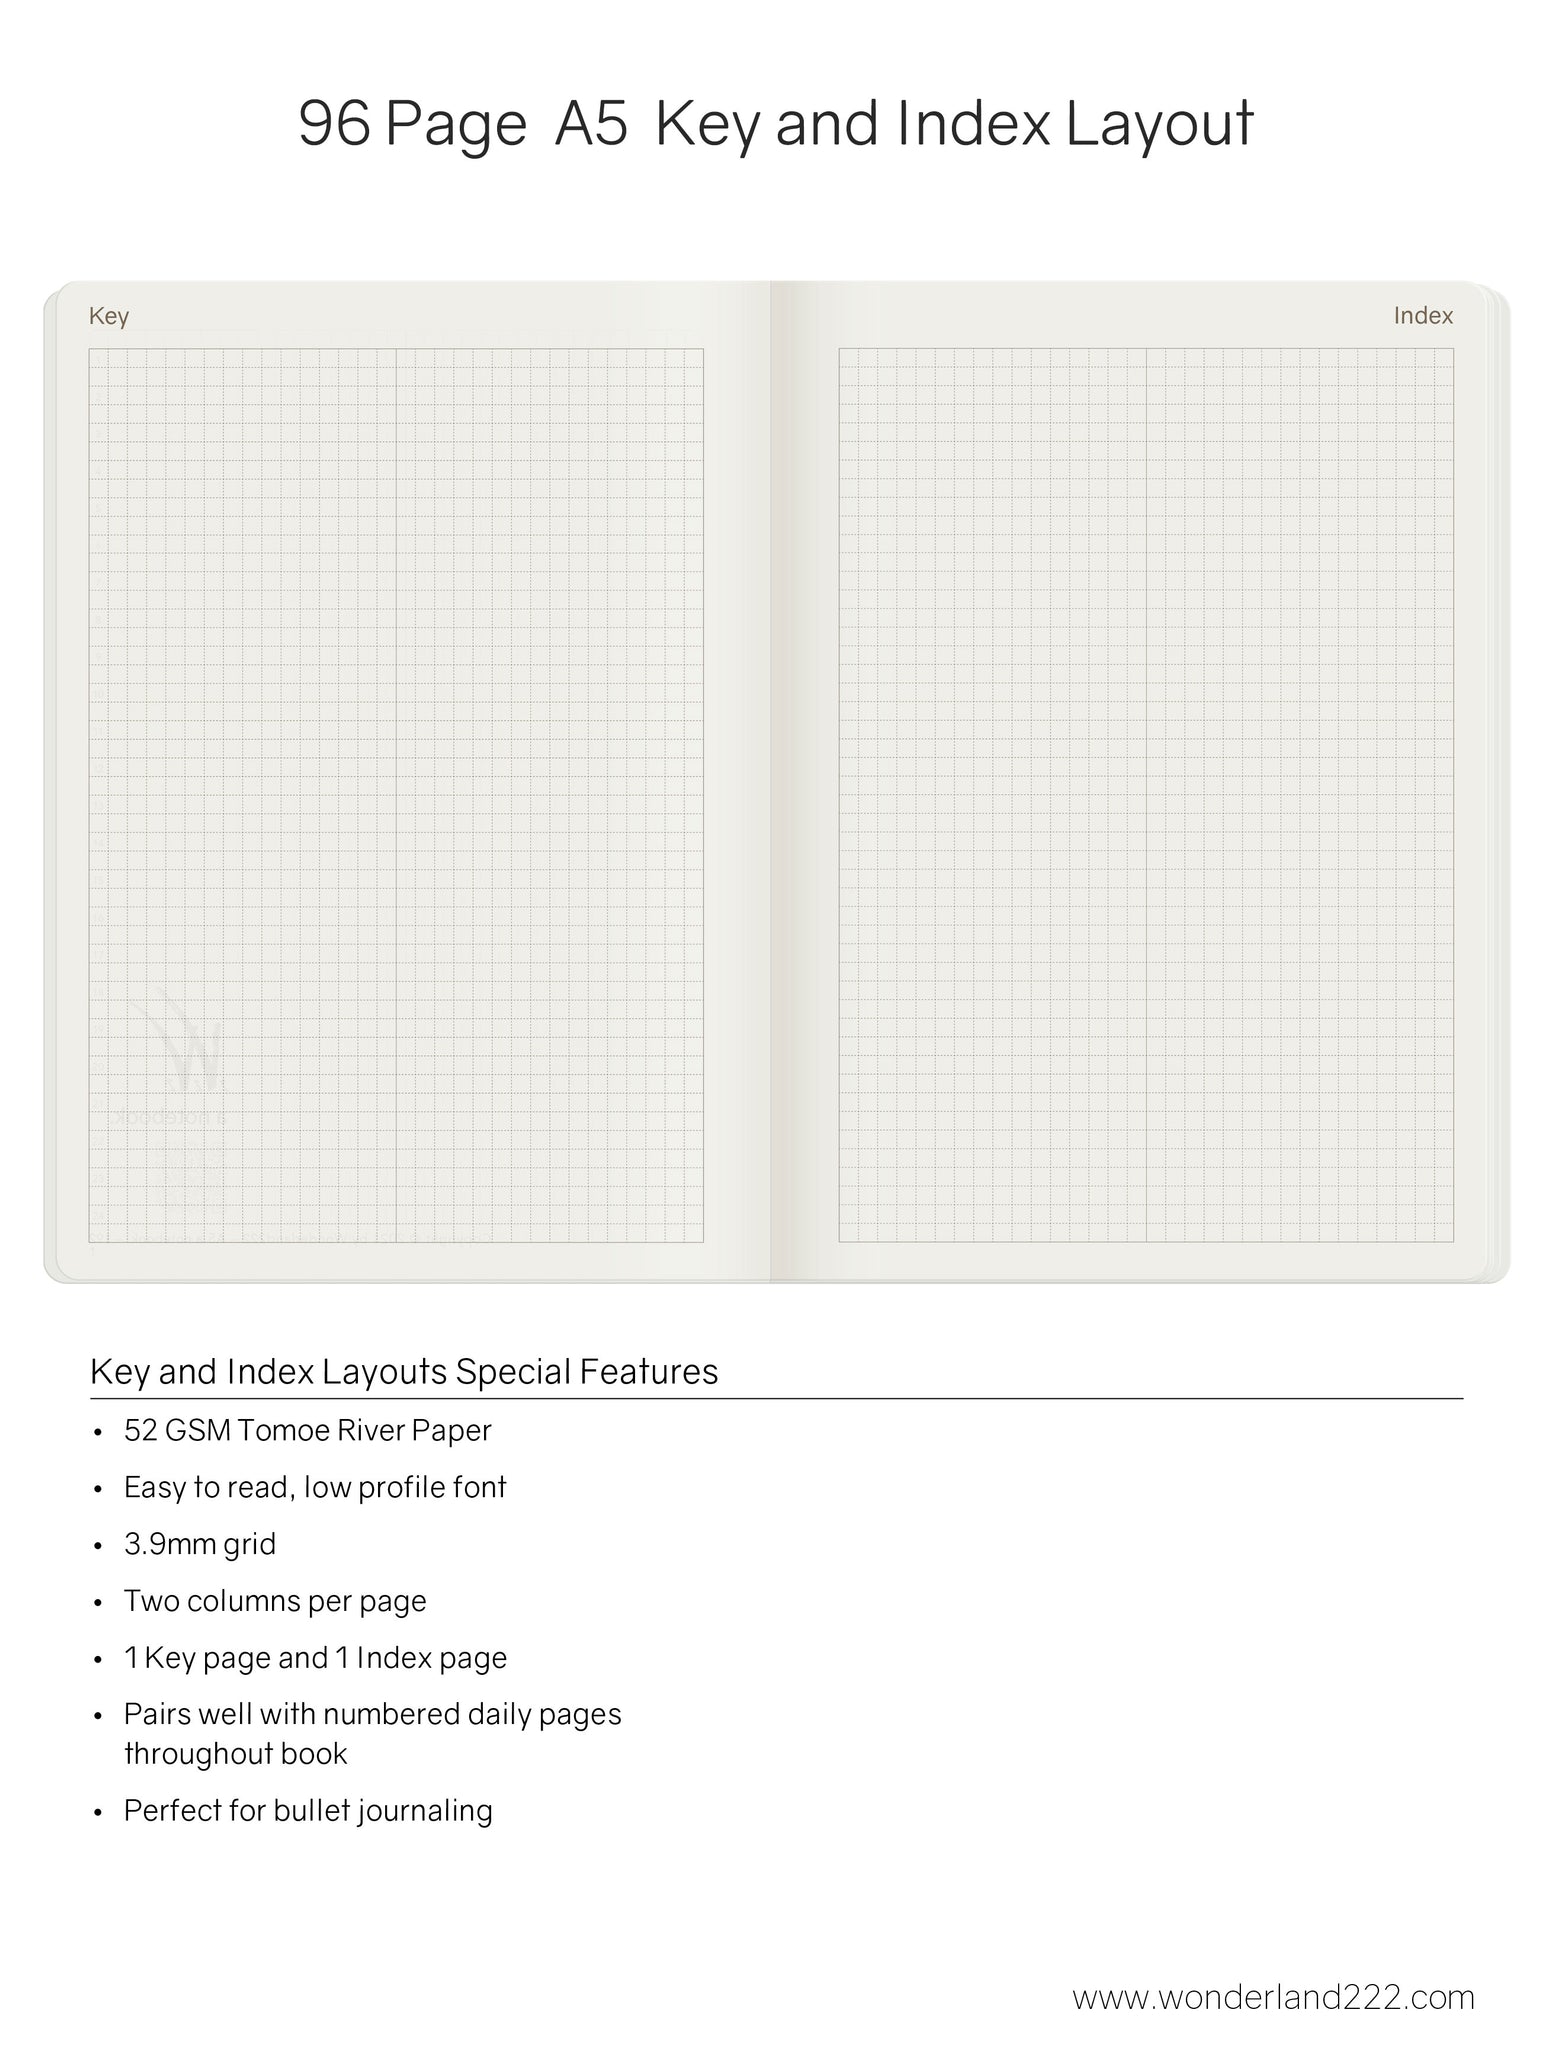 A5 Notebook (96 pages) - 2023 Edition